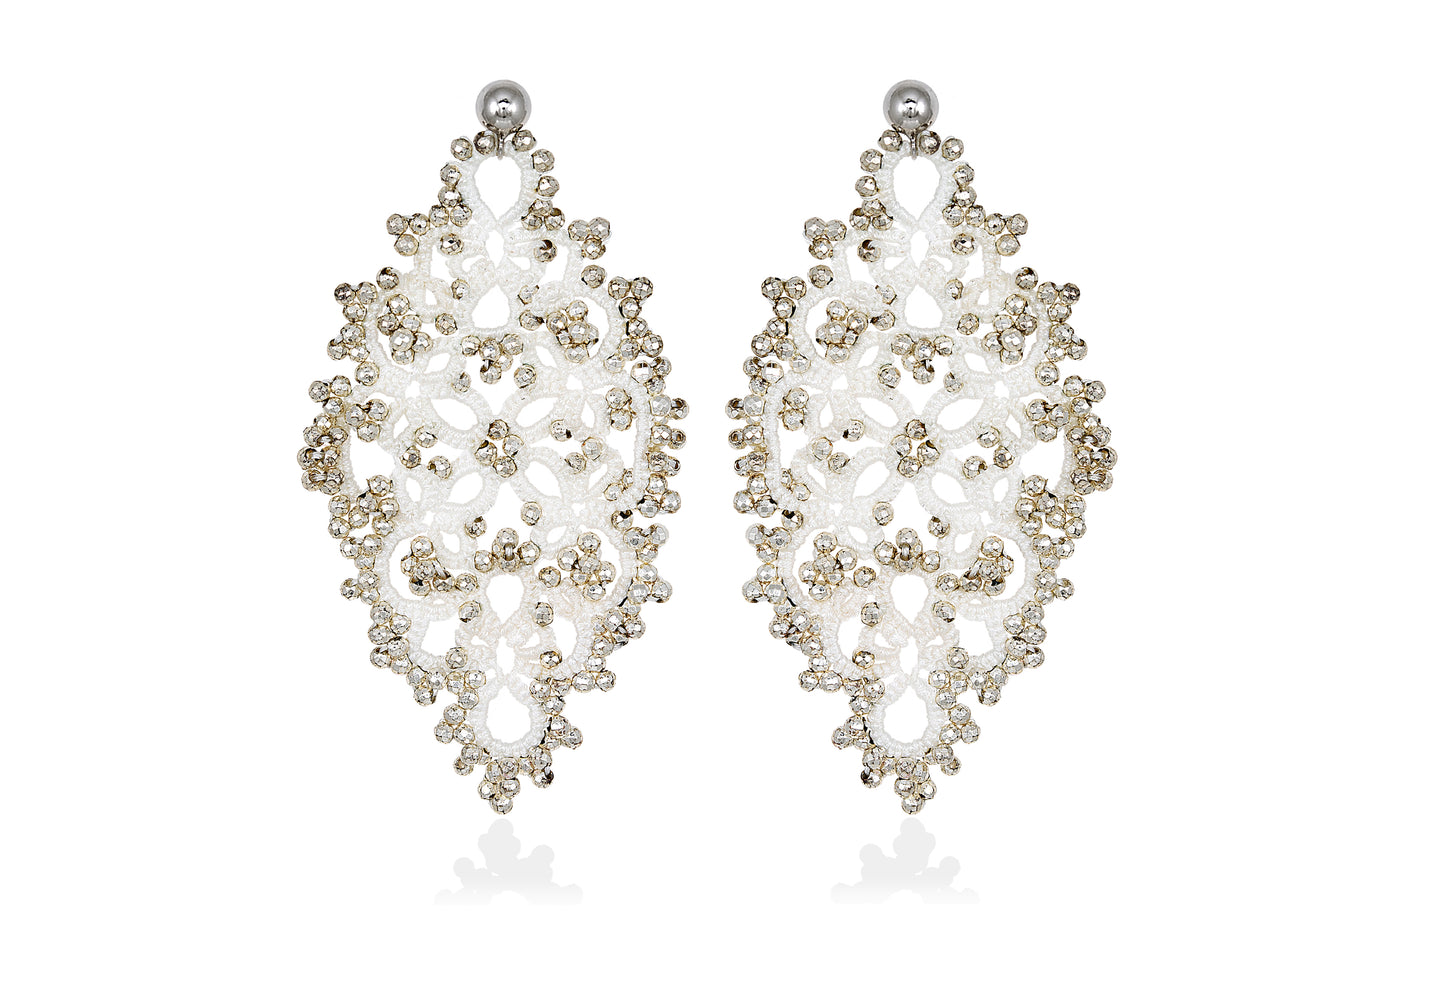 Diana lace earrings, white silver